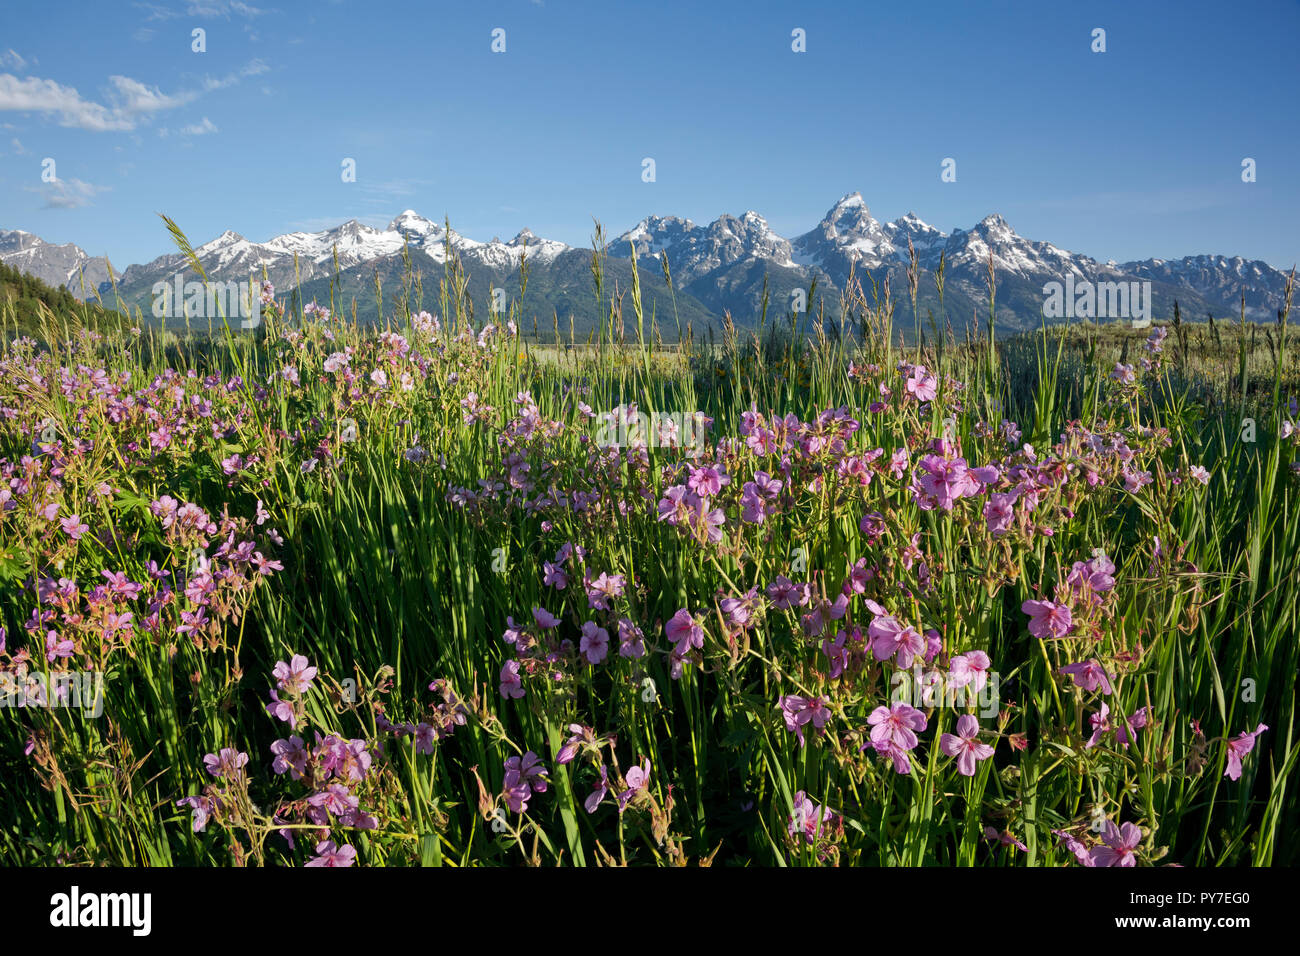 WY02525-00...WYOMING - Sticky geranium blooming in the Antelope Flats area of Jackson Hole in Grand Teton National Park. Stock Photo